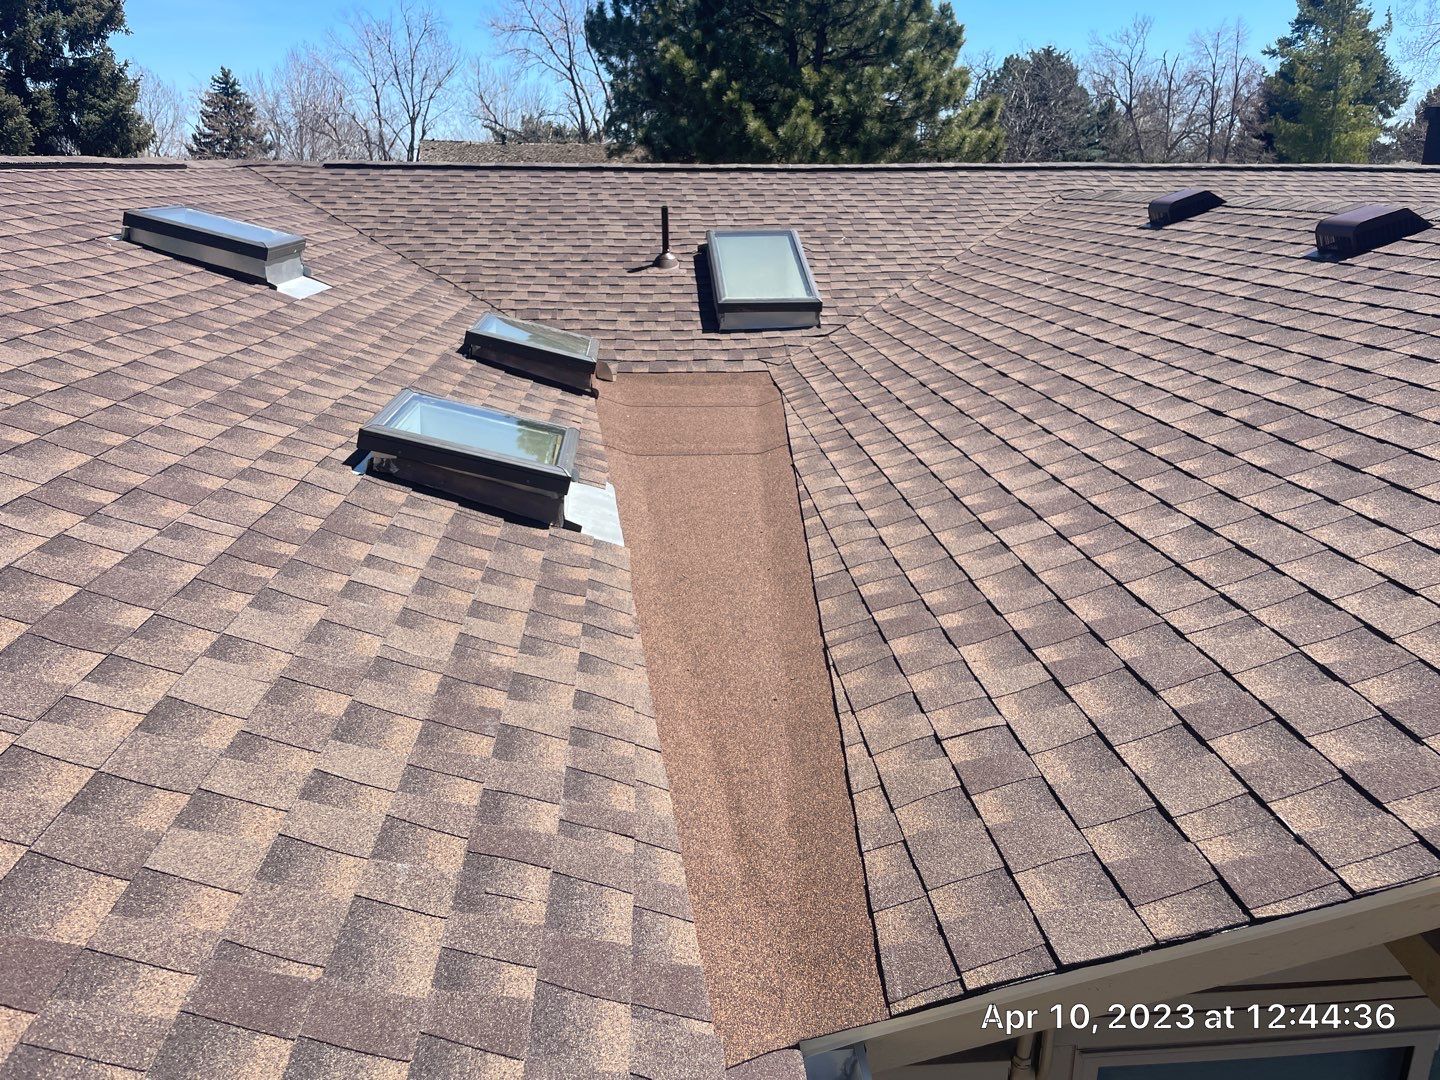 Modern Roofing Group